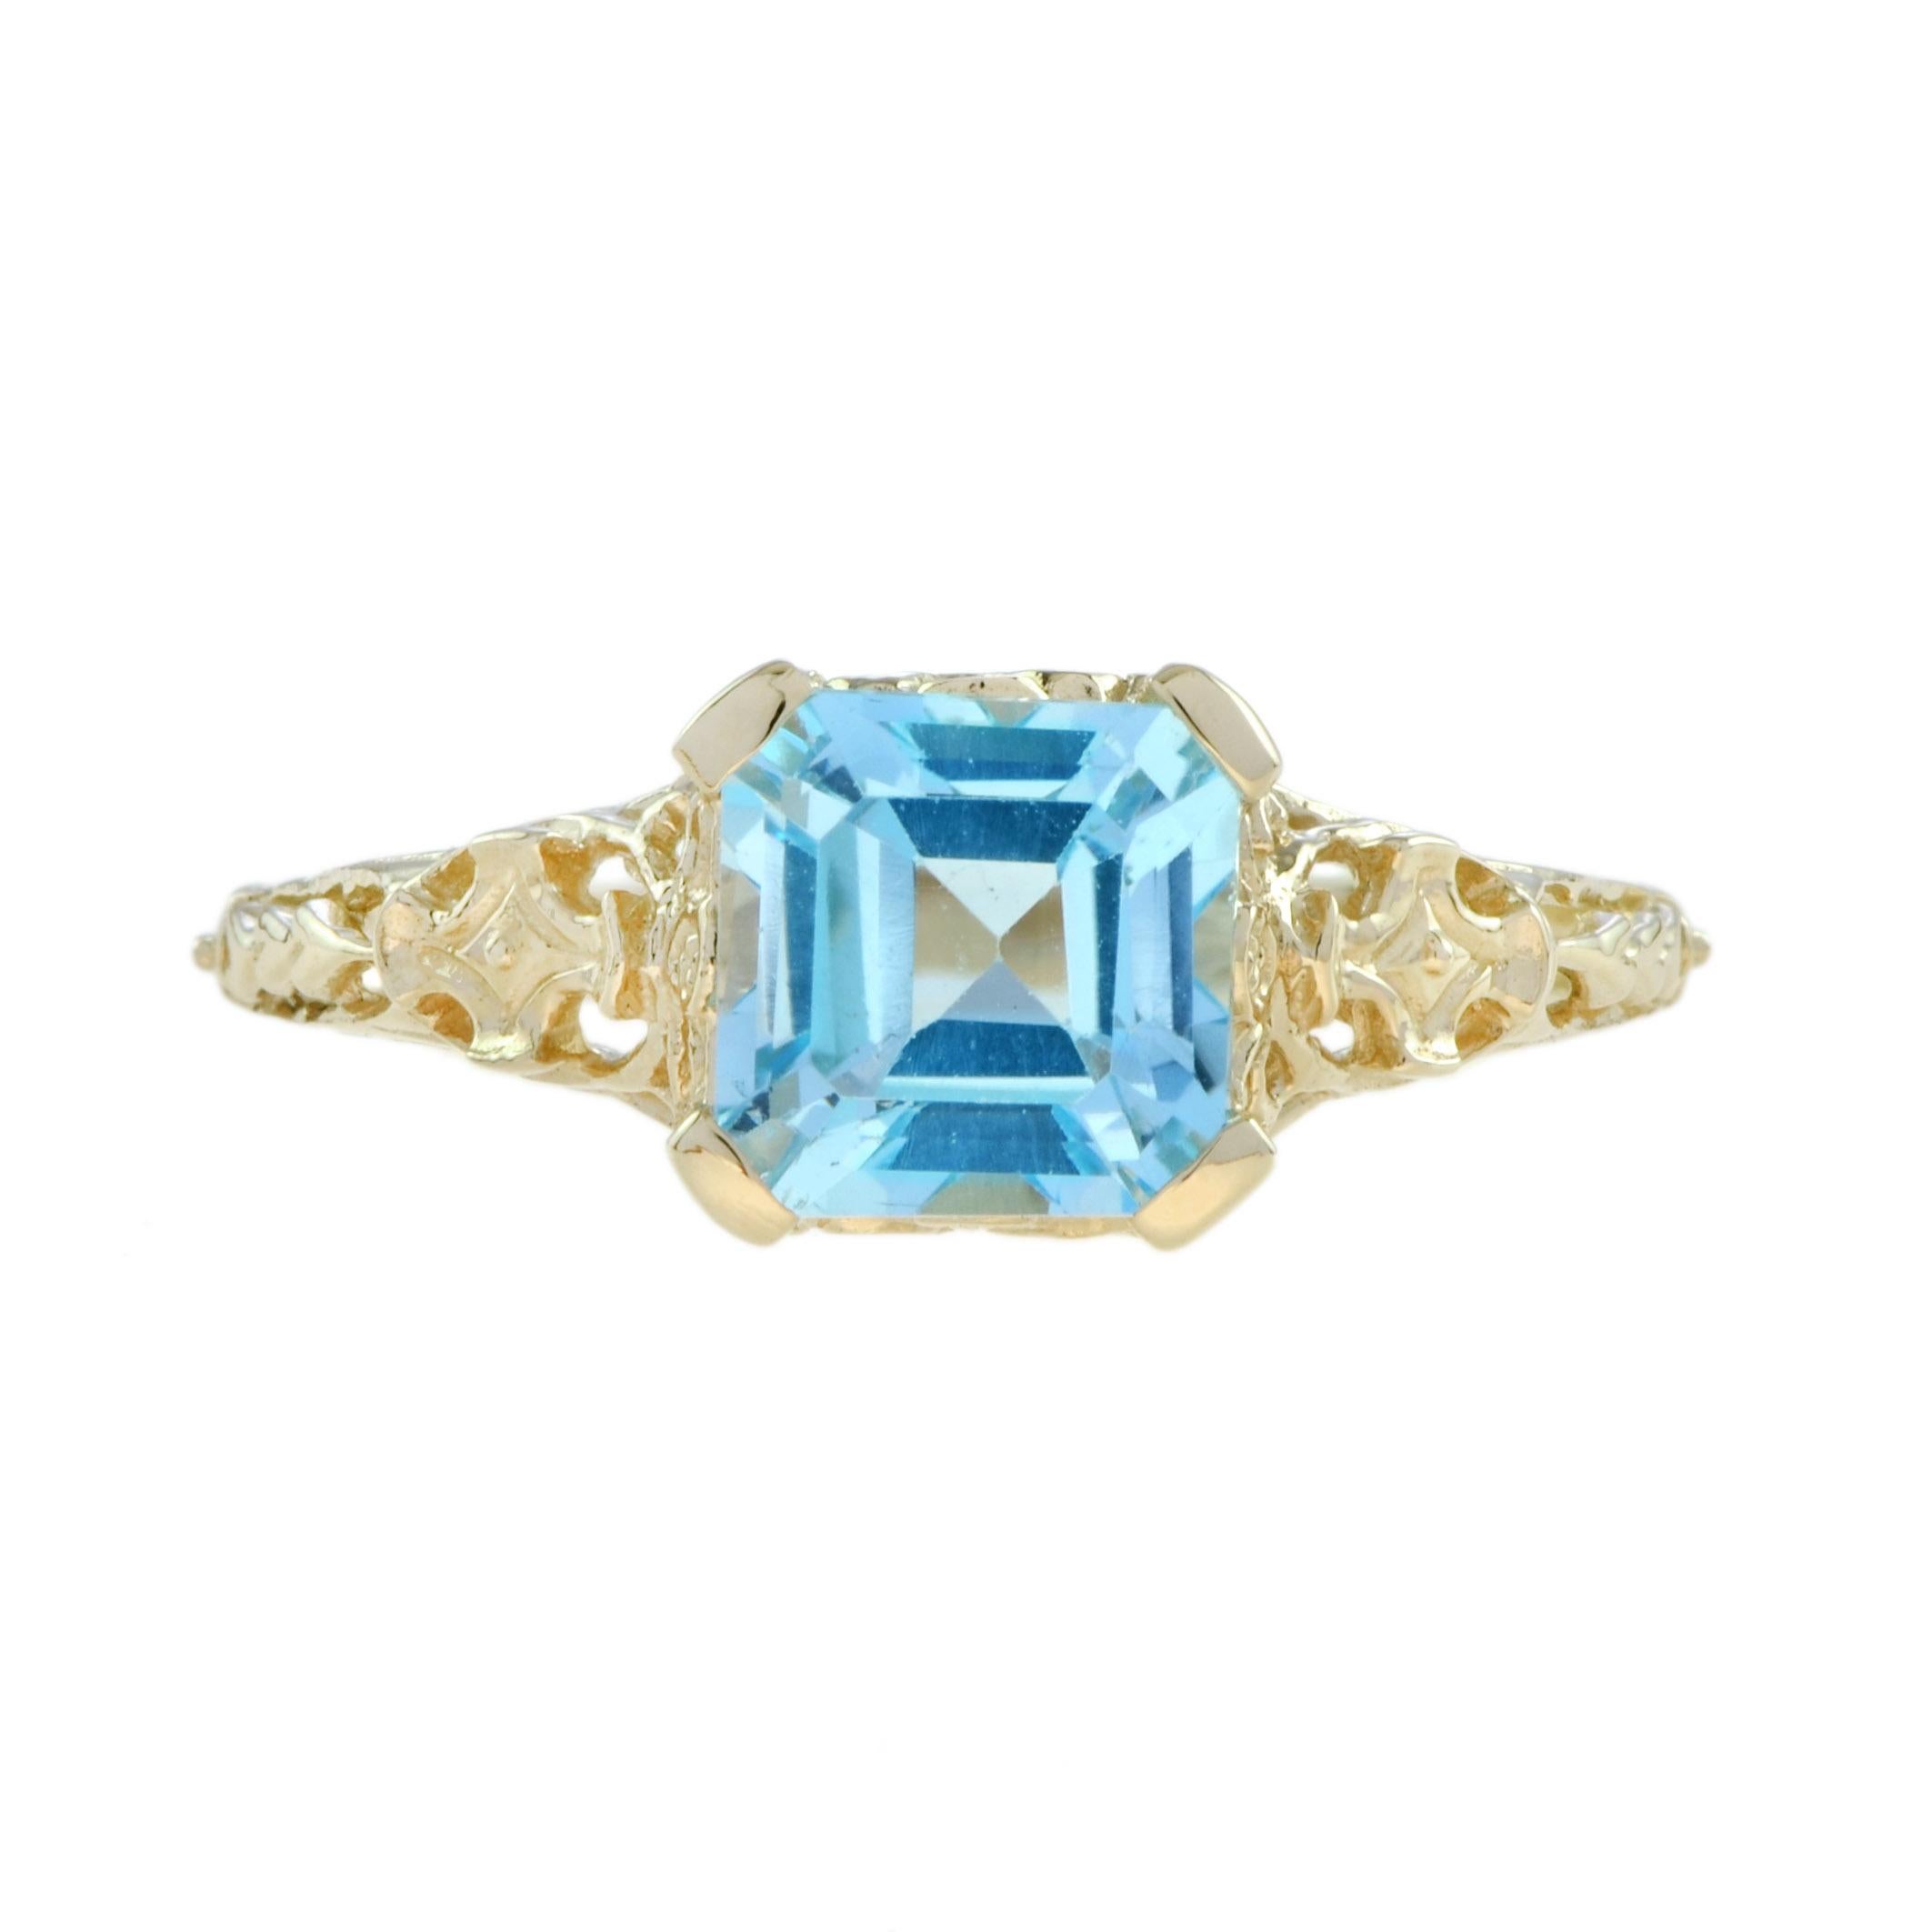 Emerald Cut Natural Blue Topaz Filigree Ring in Solid 14K Yellow Gold